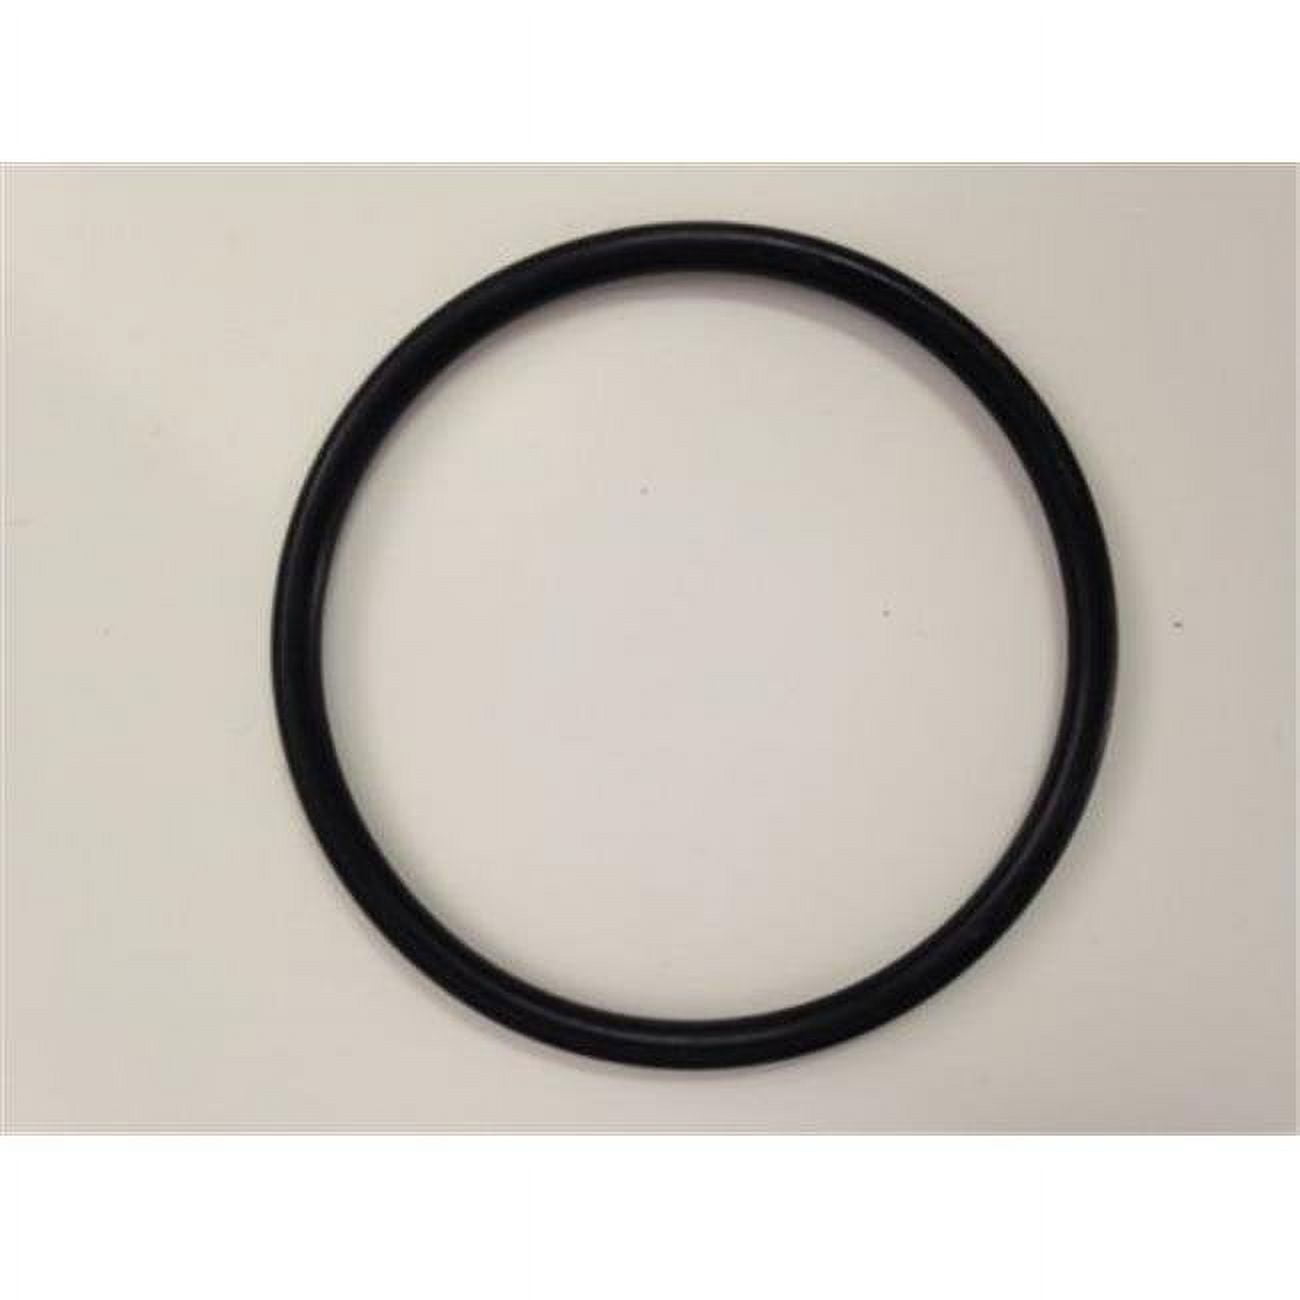 29486 Replacement O-ring For The 3 In. Check Valve